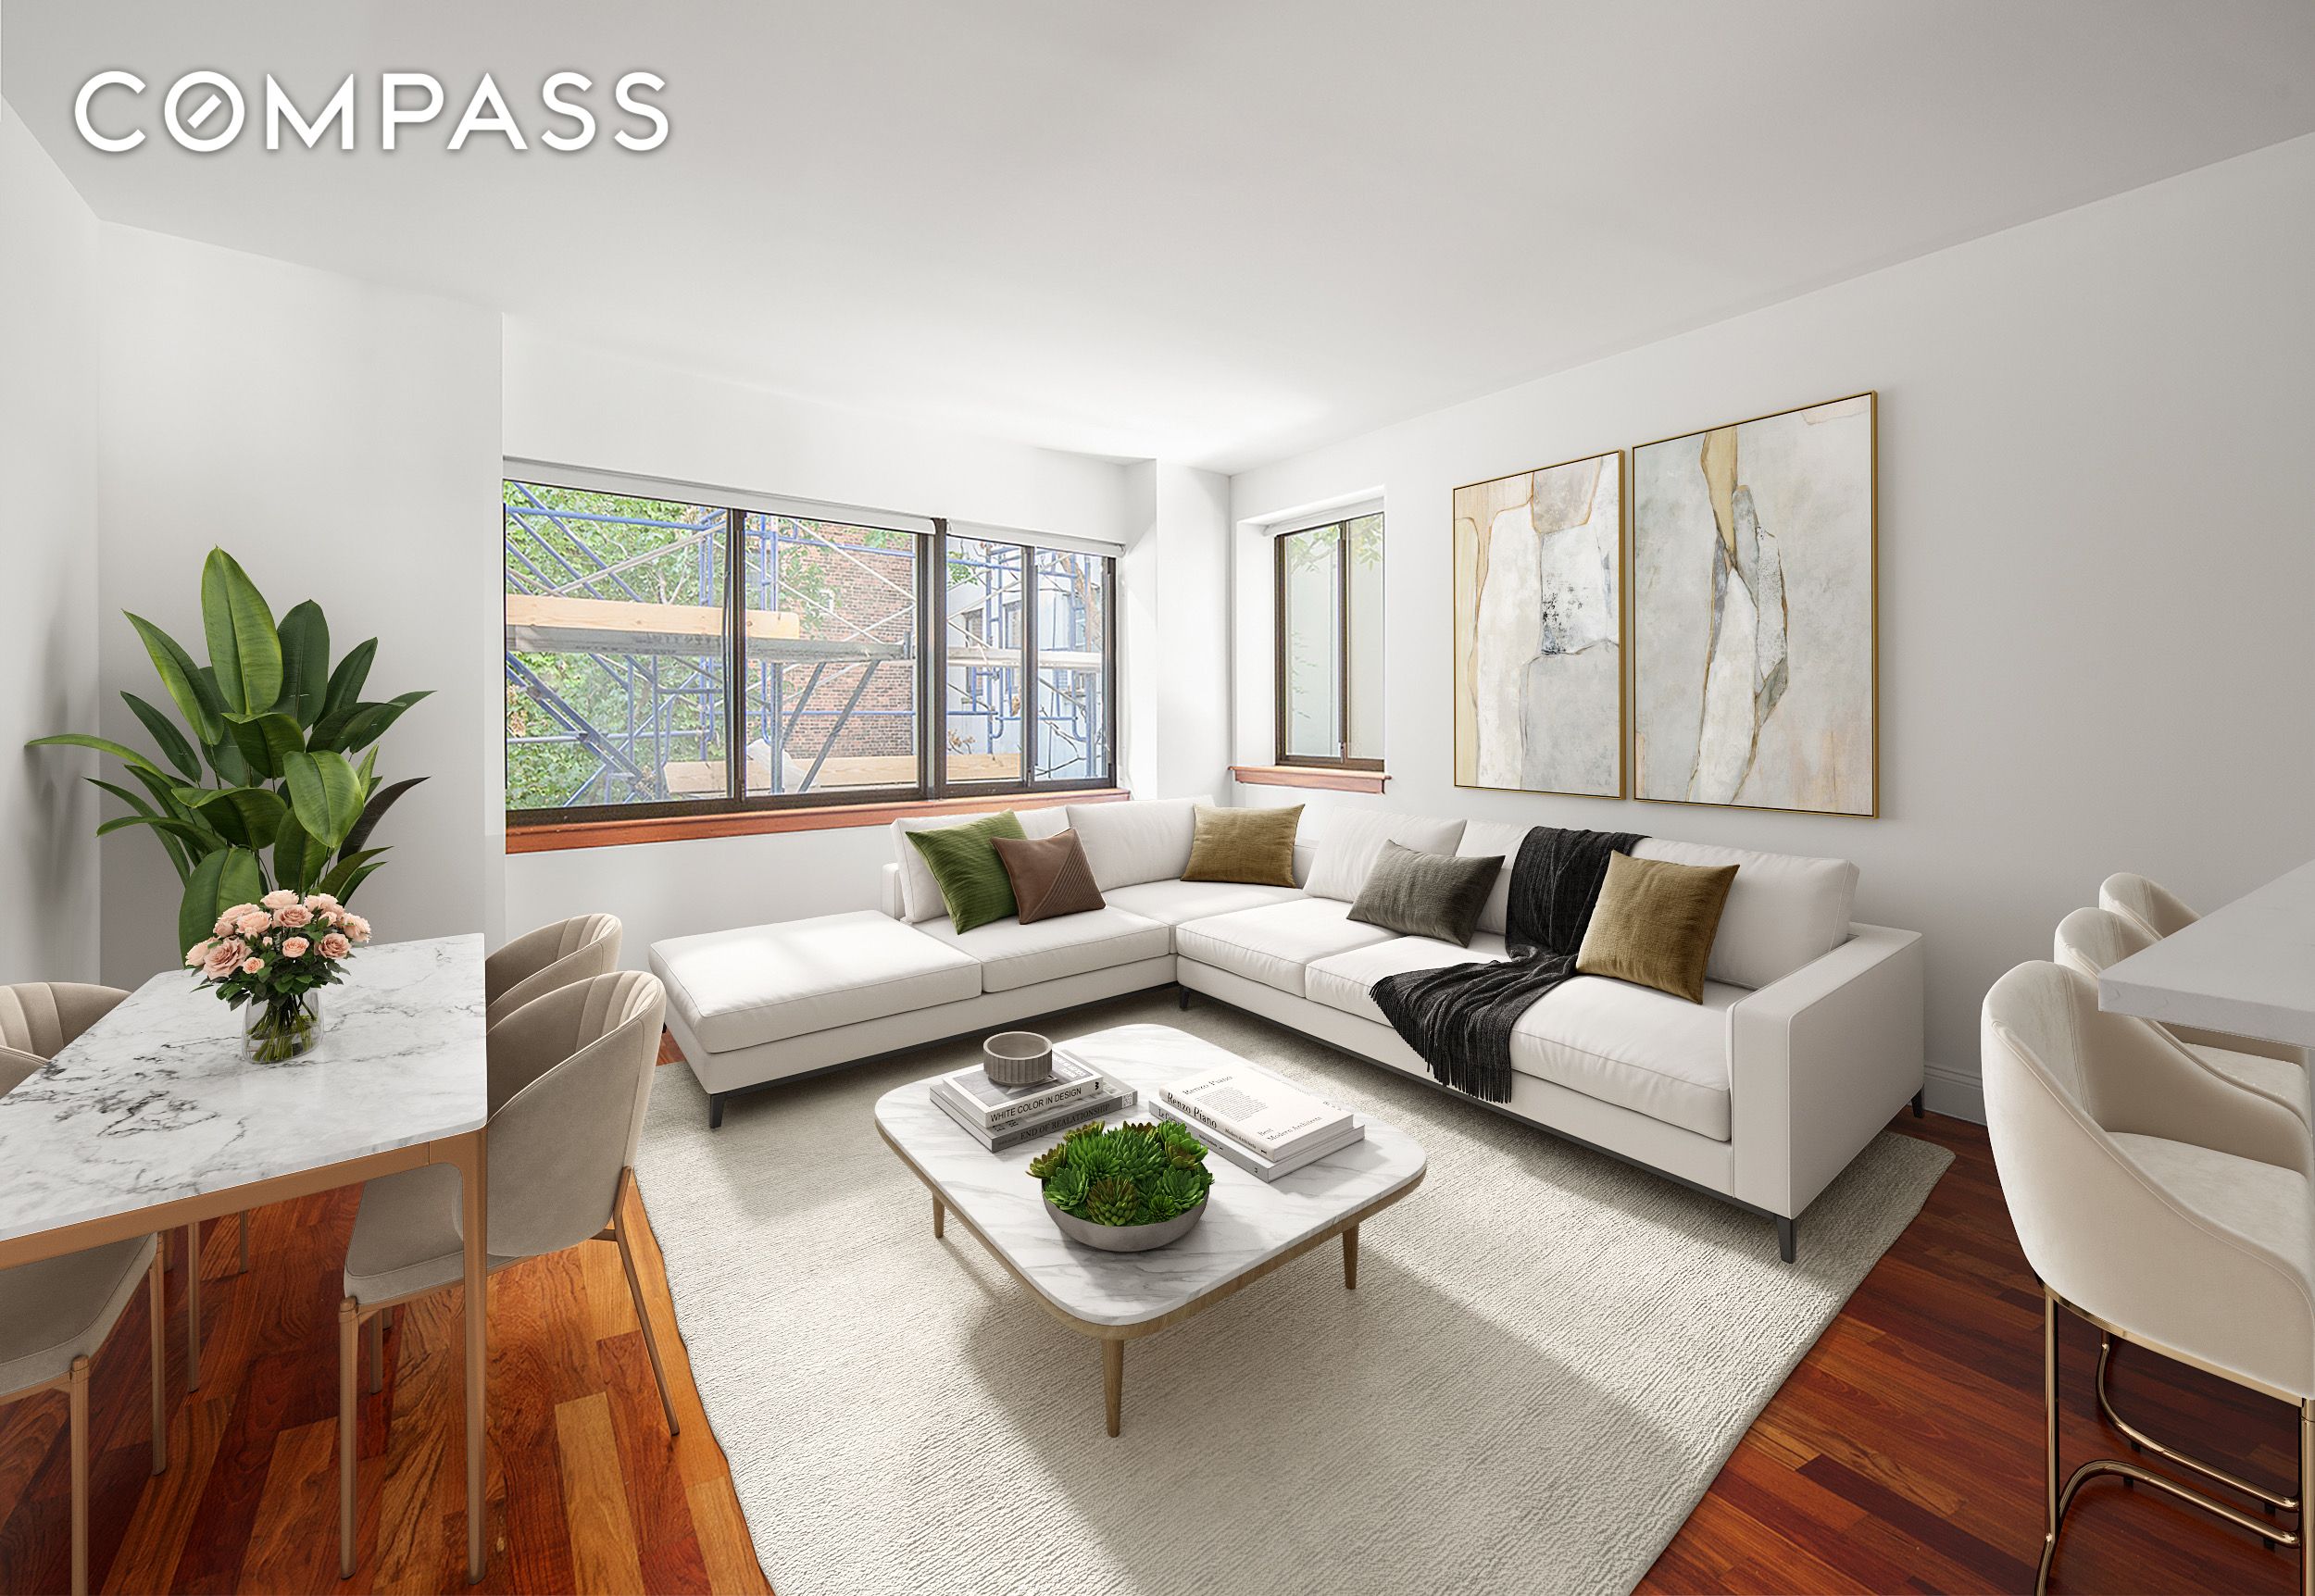 164 Bank Street 4A, West Village, Downtown, NYC - 1 Bedrooms  

1 Rooms - 